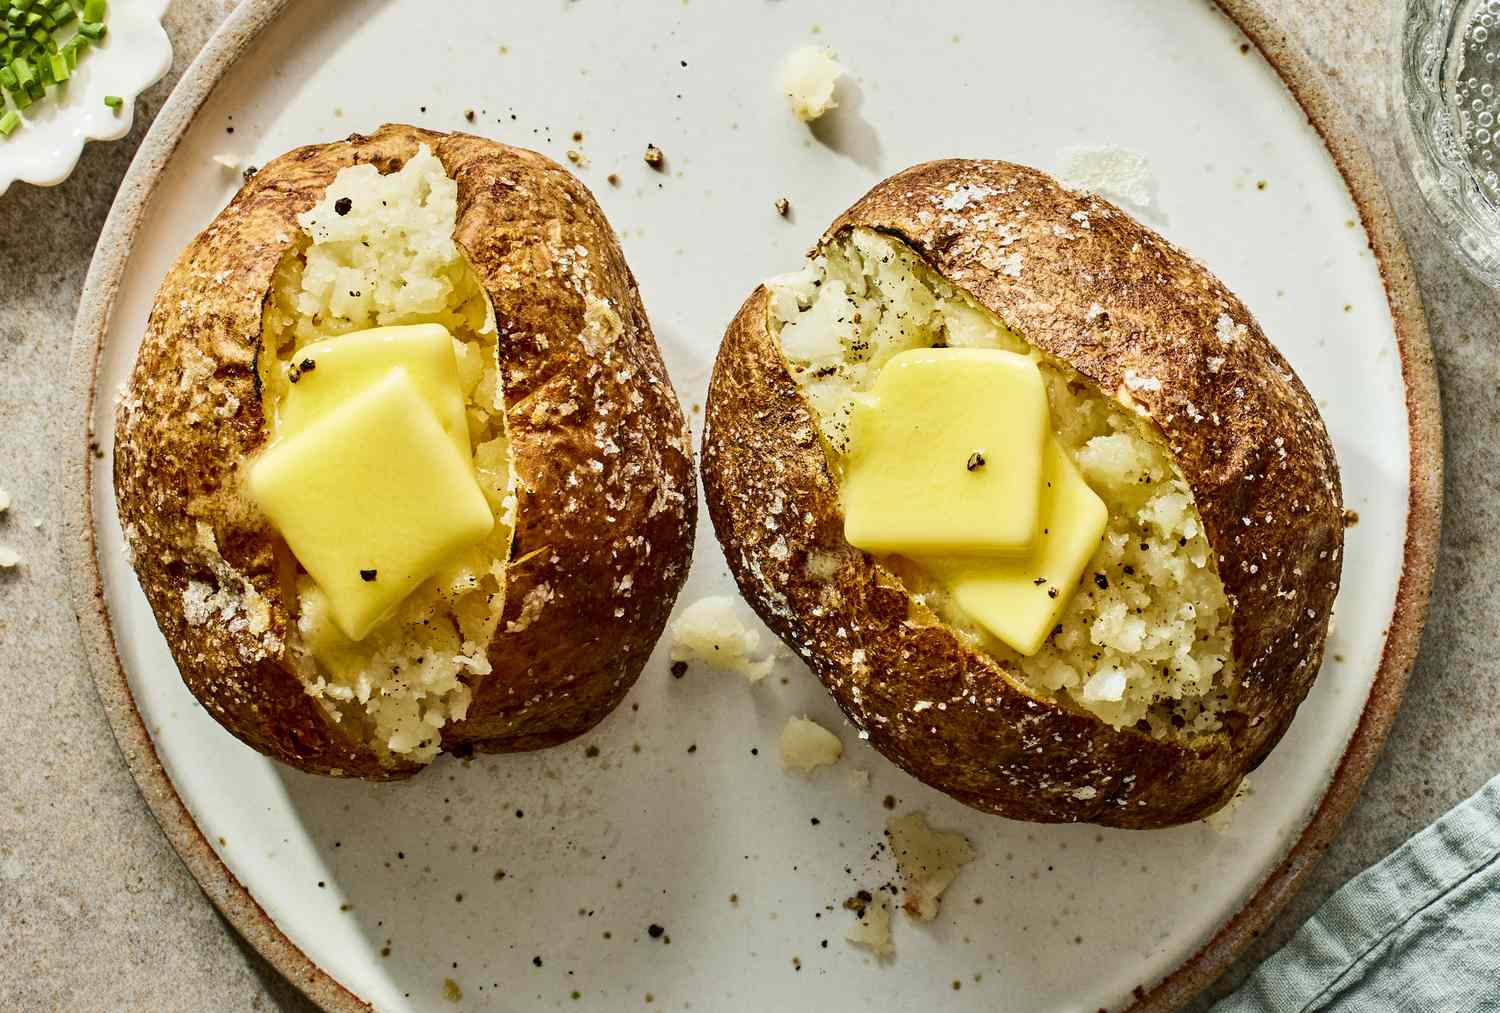 For the Best Baked Potatoes, Use an Air Fryer